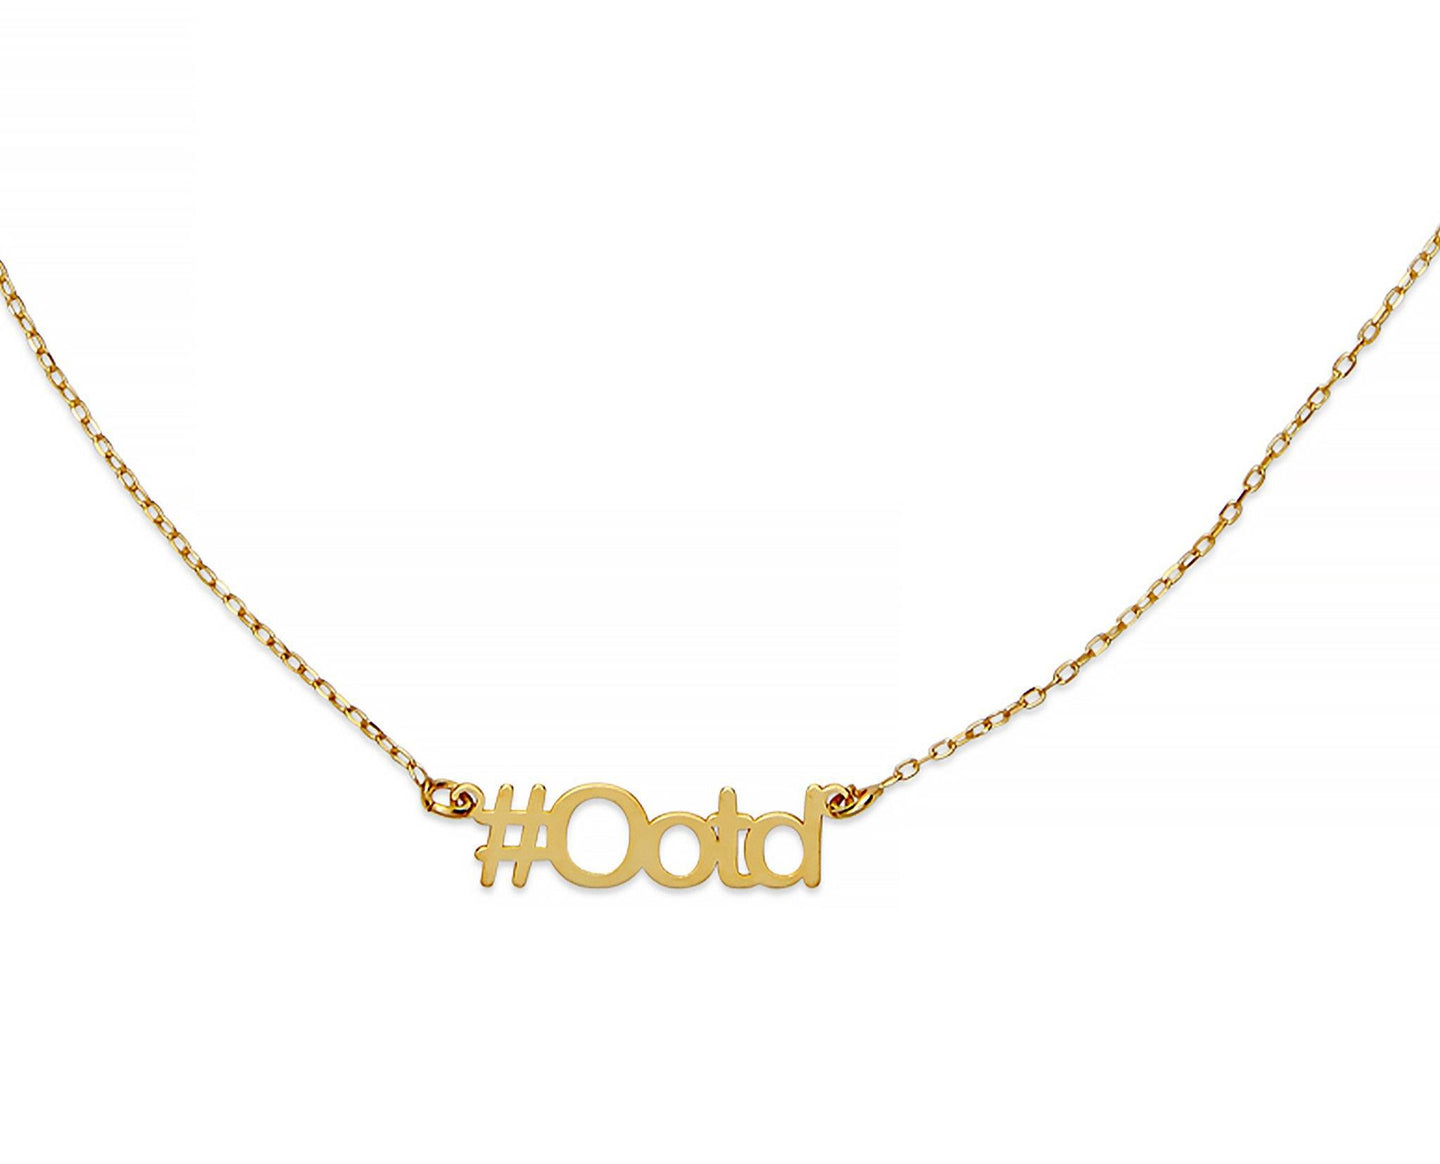 OOTD Hashtag Necklace - InclusiveJewelry